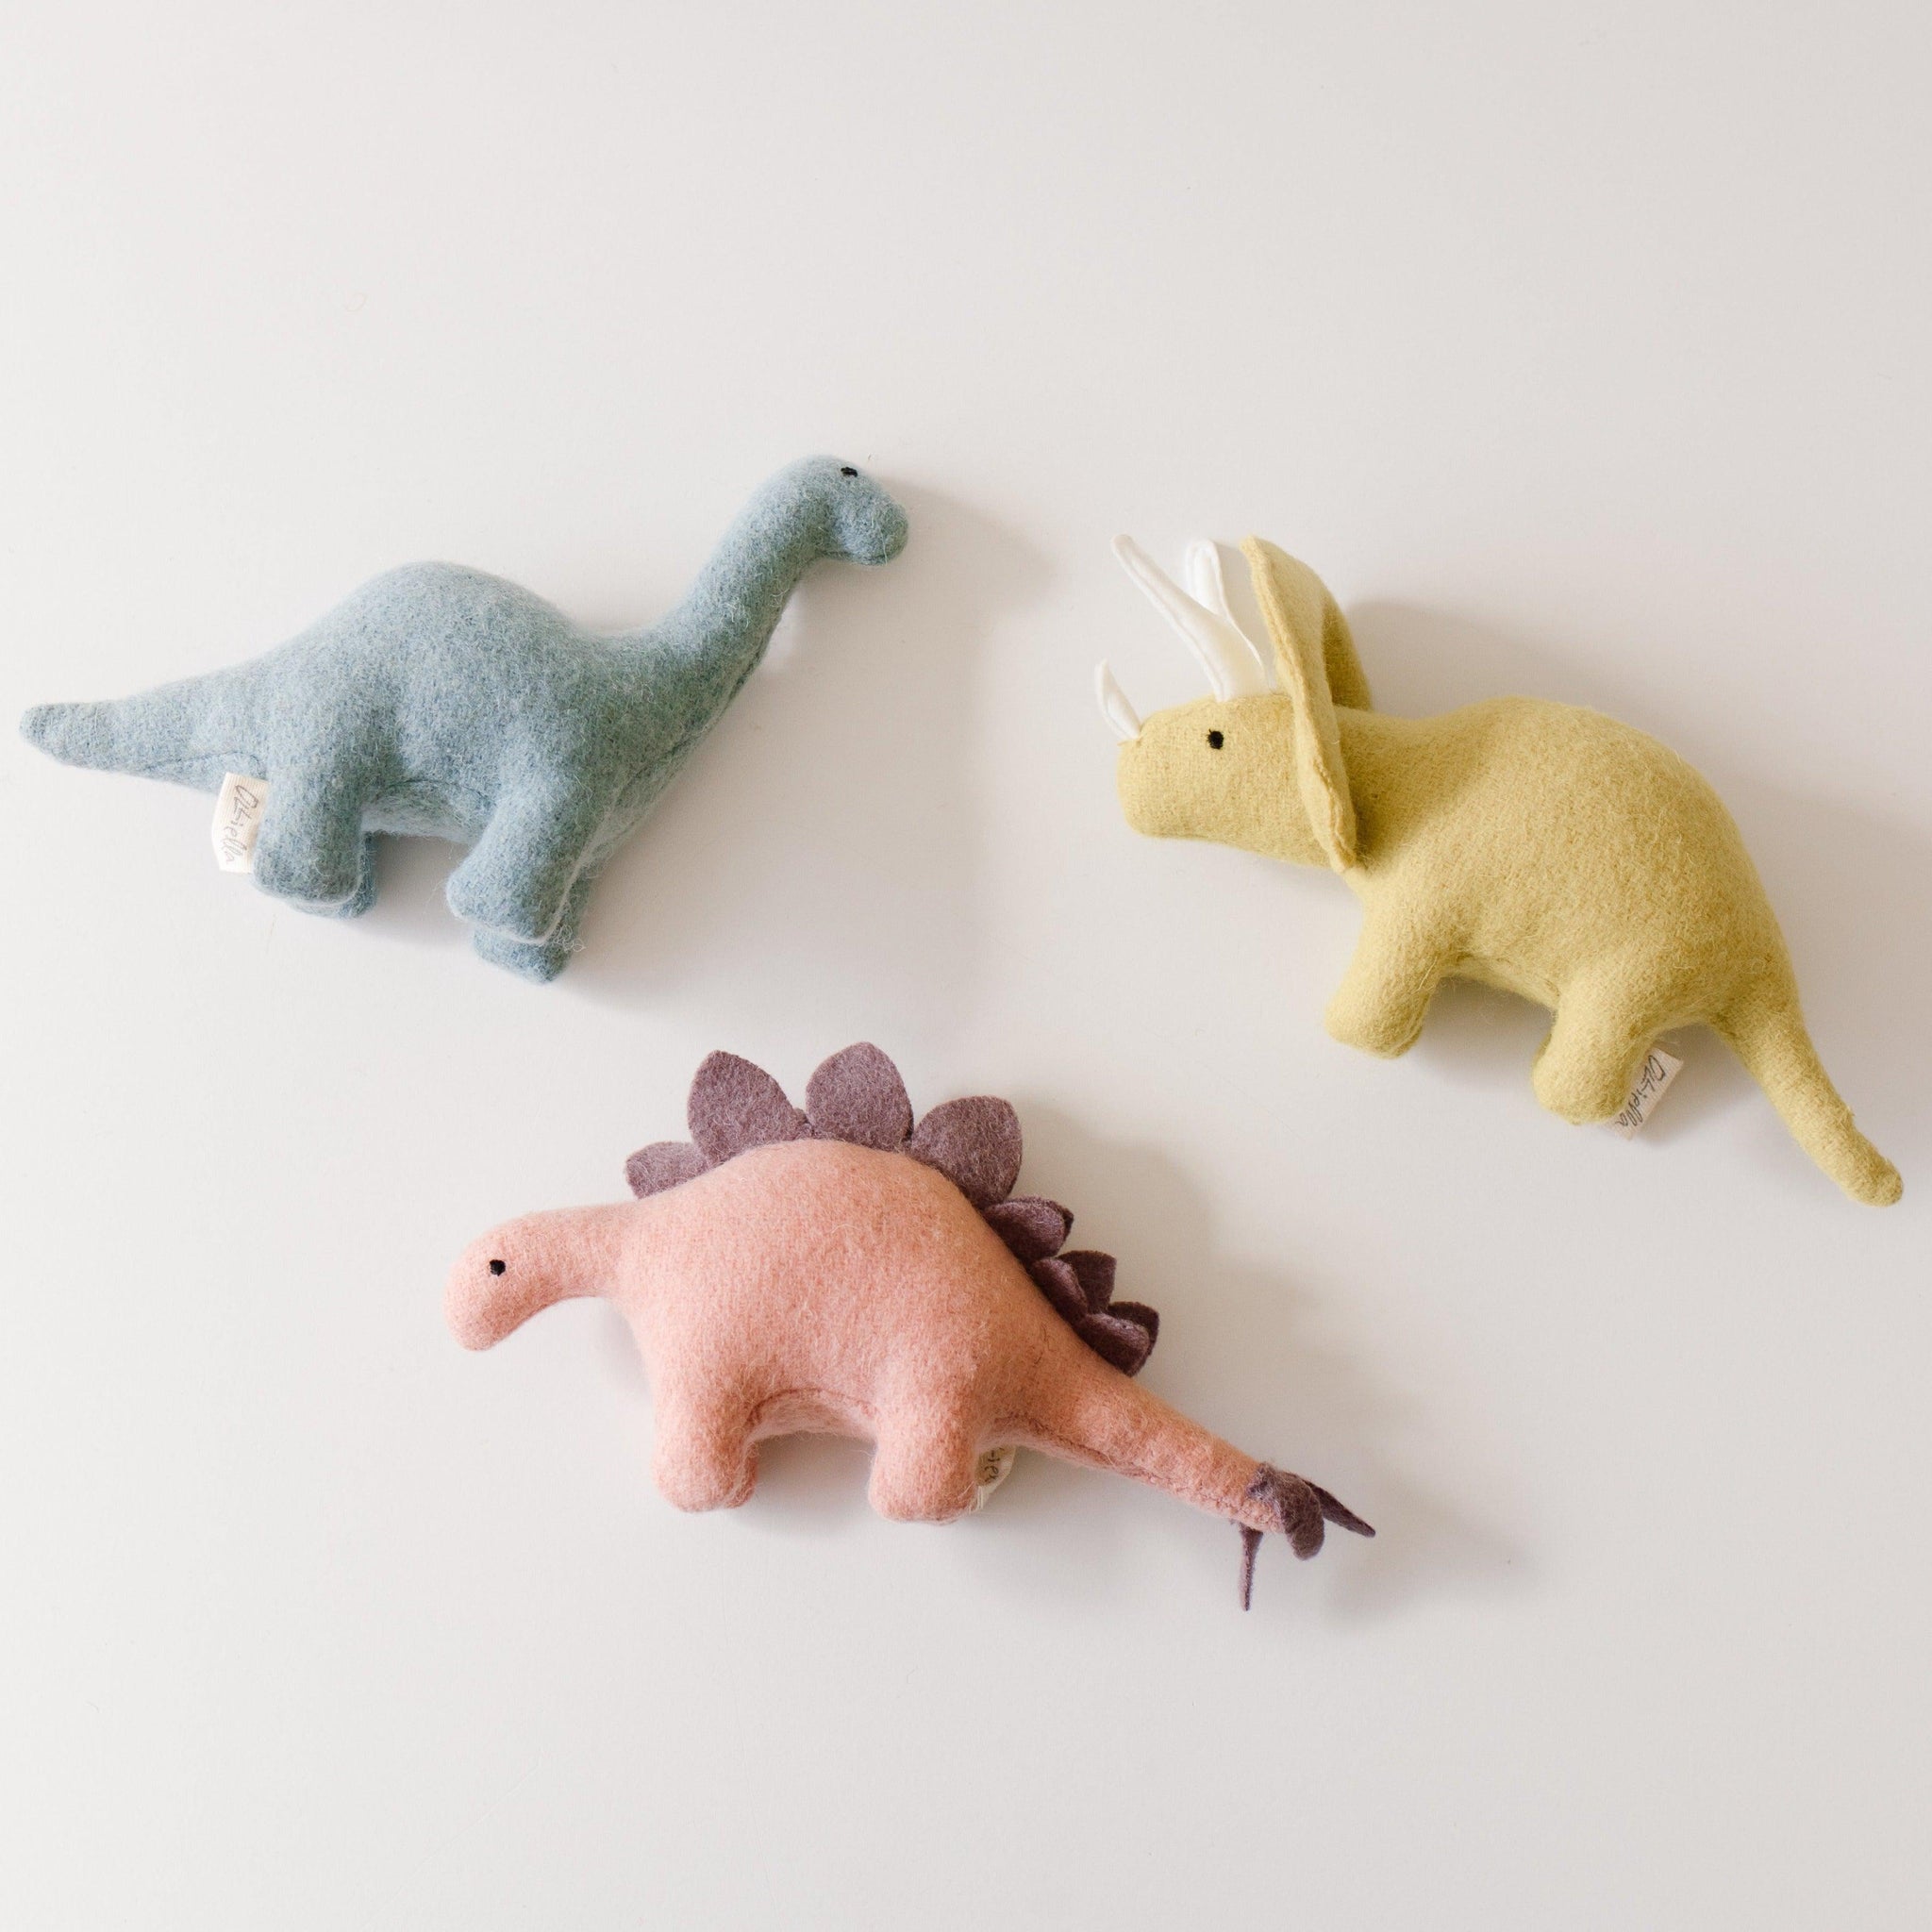 Find shy Stegosaurus nibbling ferns, befriend the frilly Triceratops stomping in the swamp with a sprinkle of imagination, the adventures are endless.